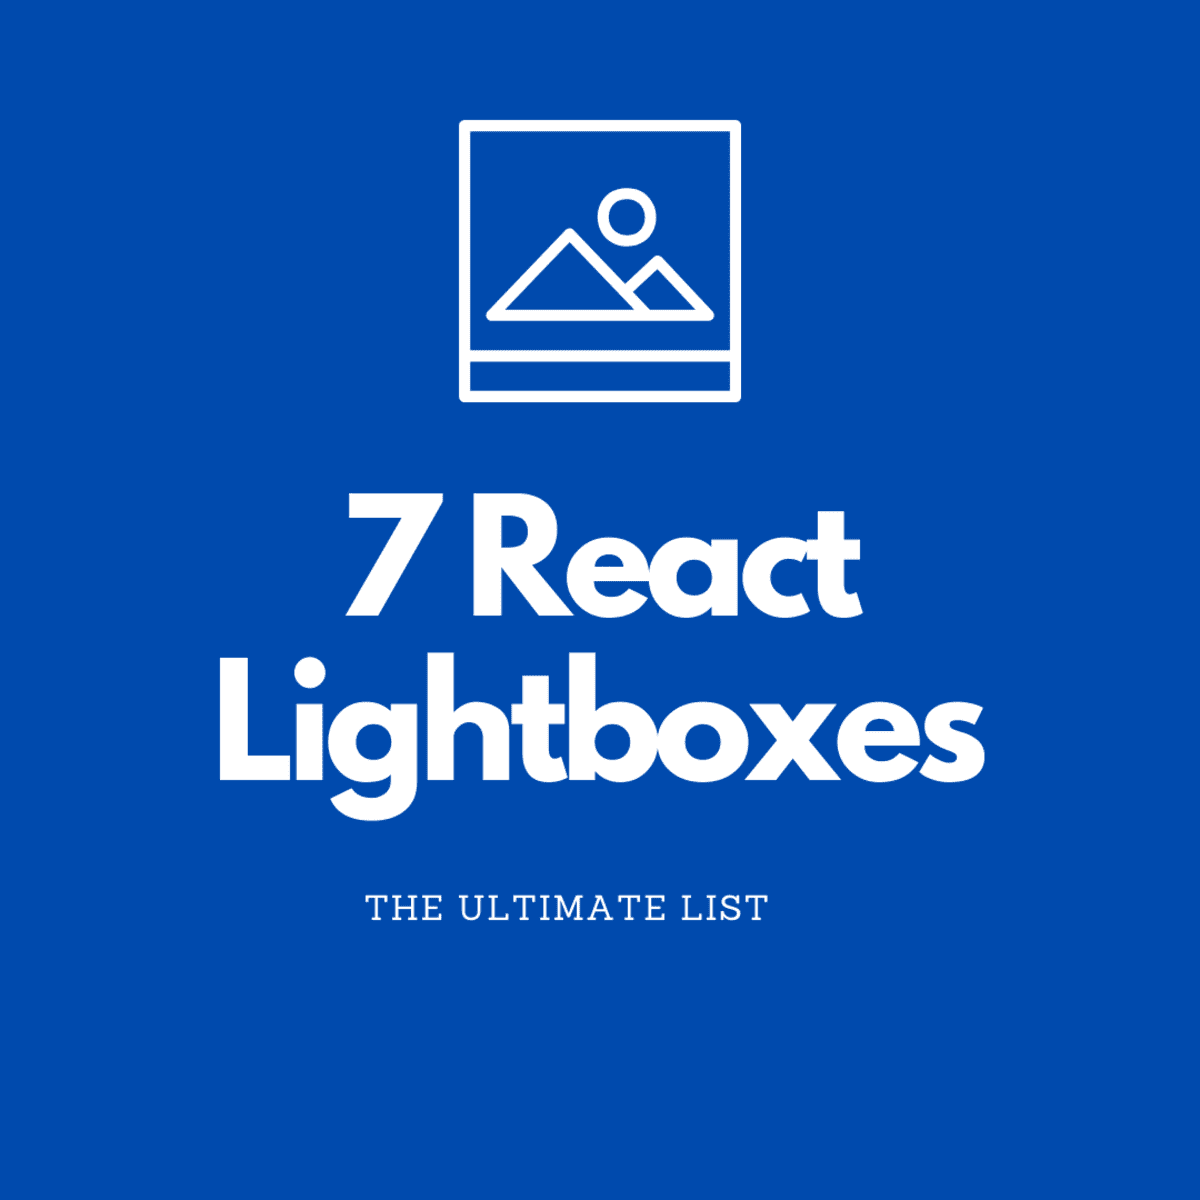 Yet Another React Lightbox - Modern lightbox component for React